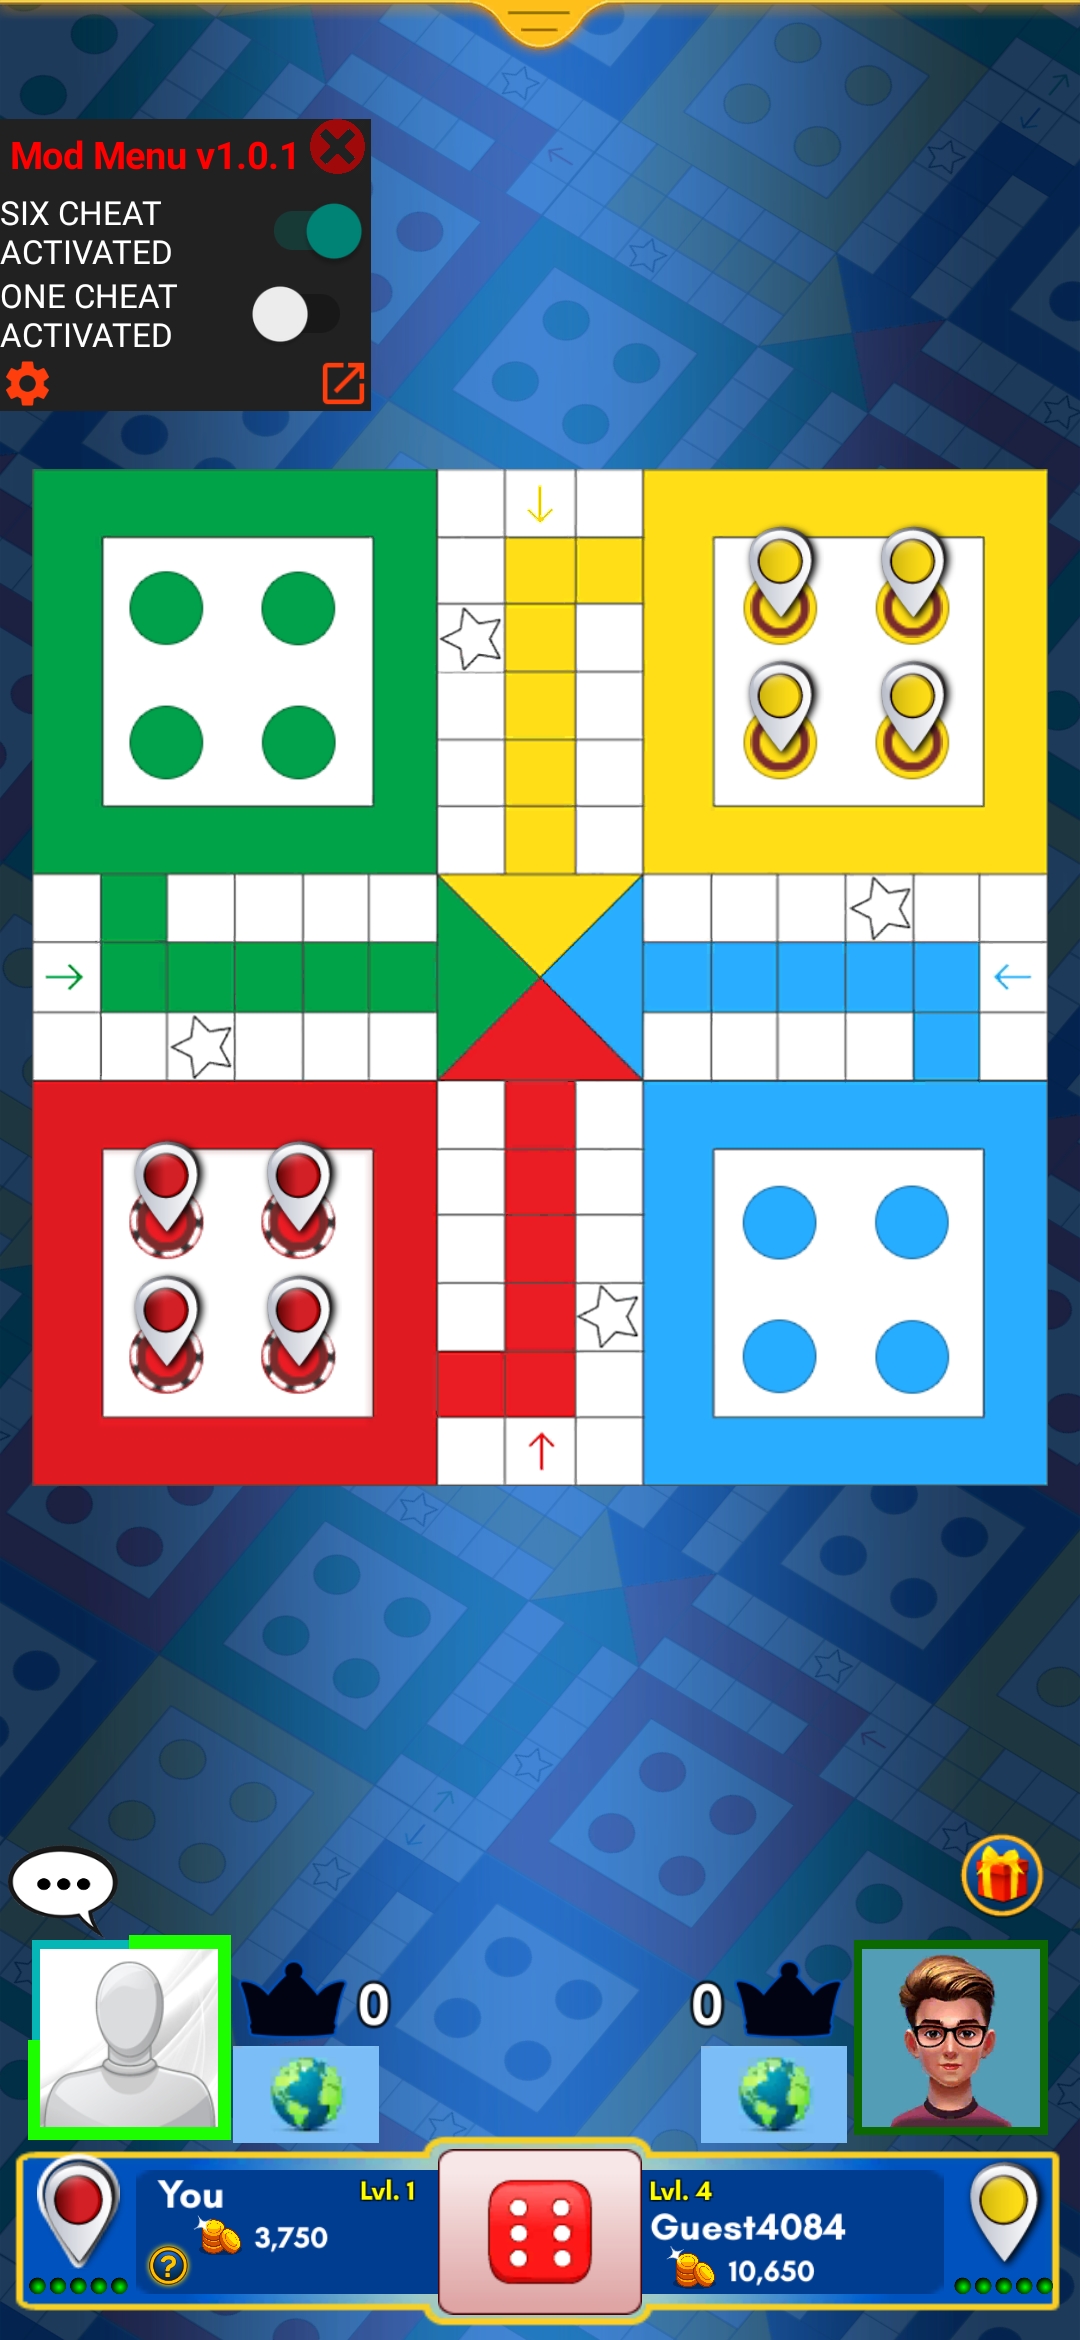 ludo king game download 2020 for pc